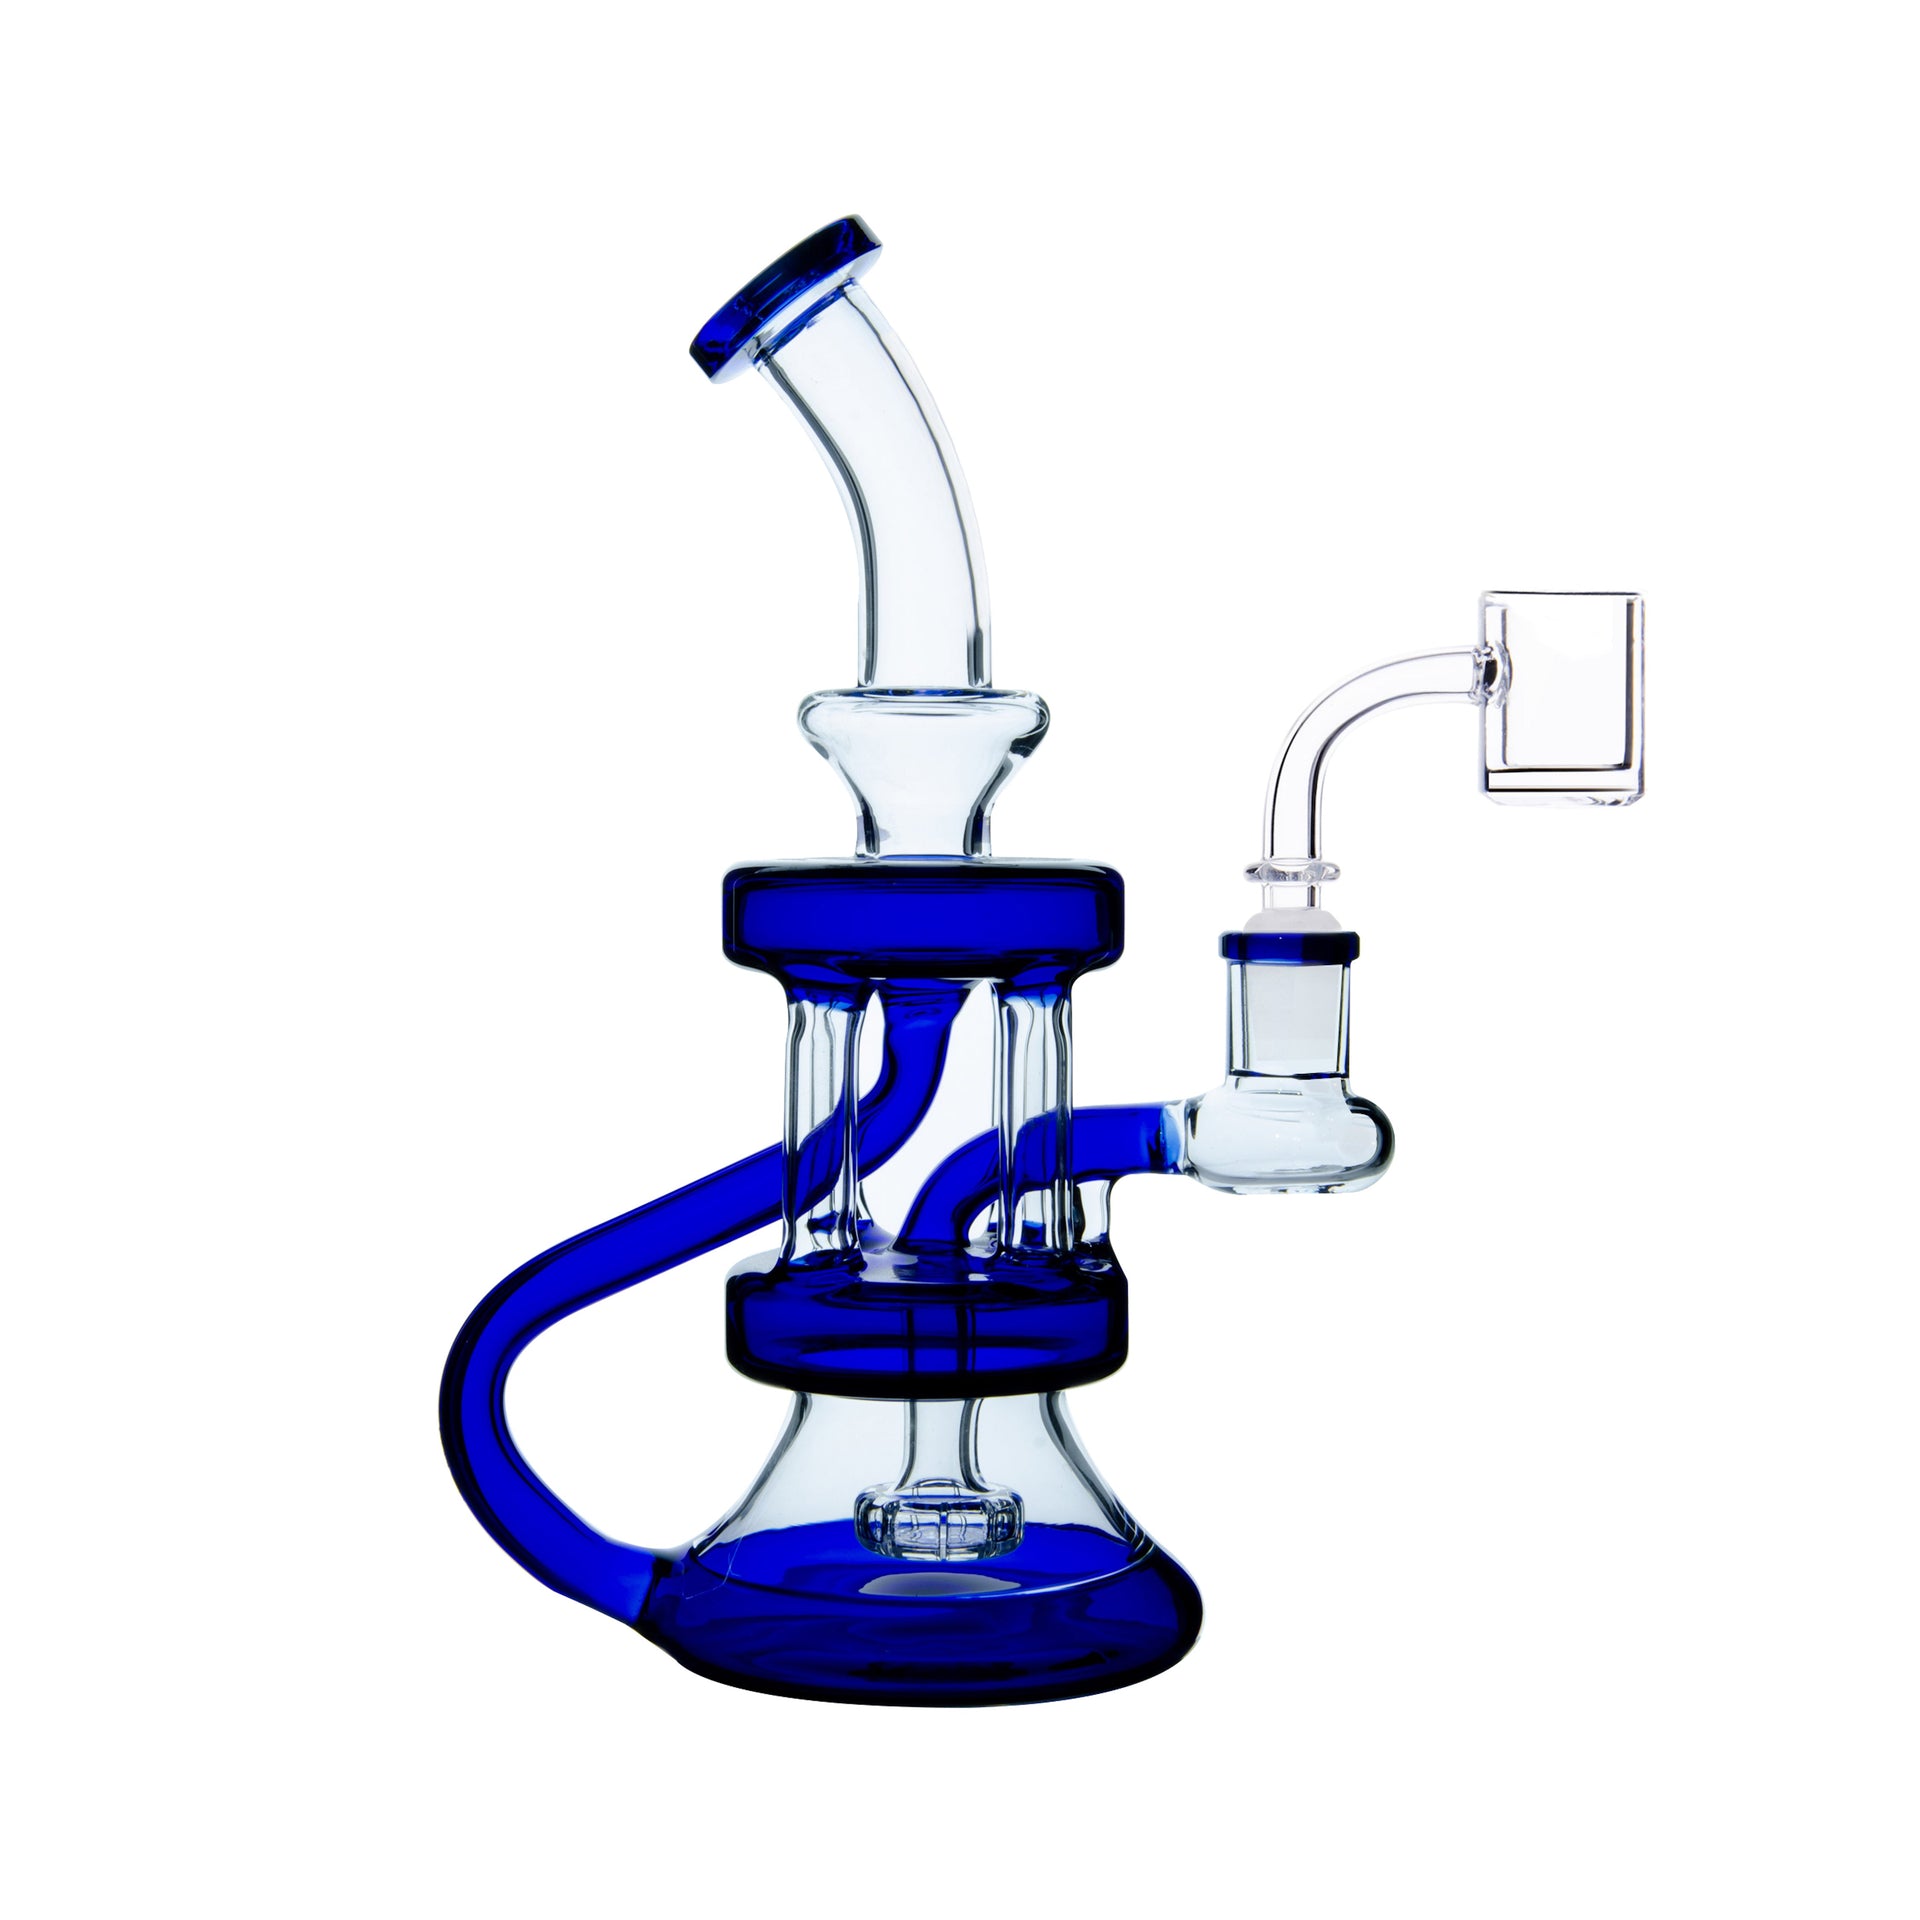 Cyclone Recycler Dab Rig | Third Party Brands | 420 Science